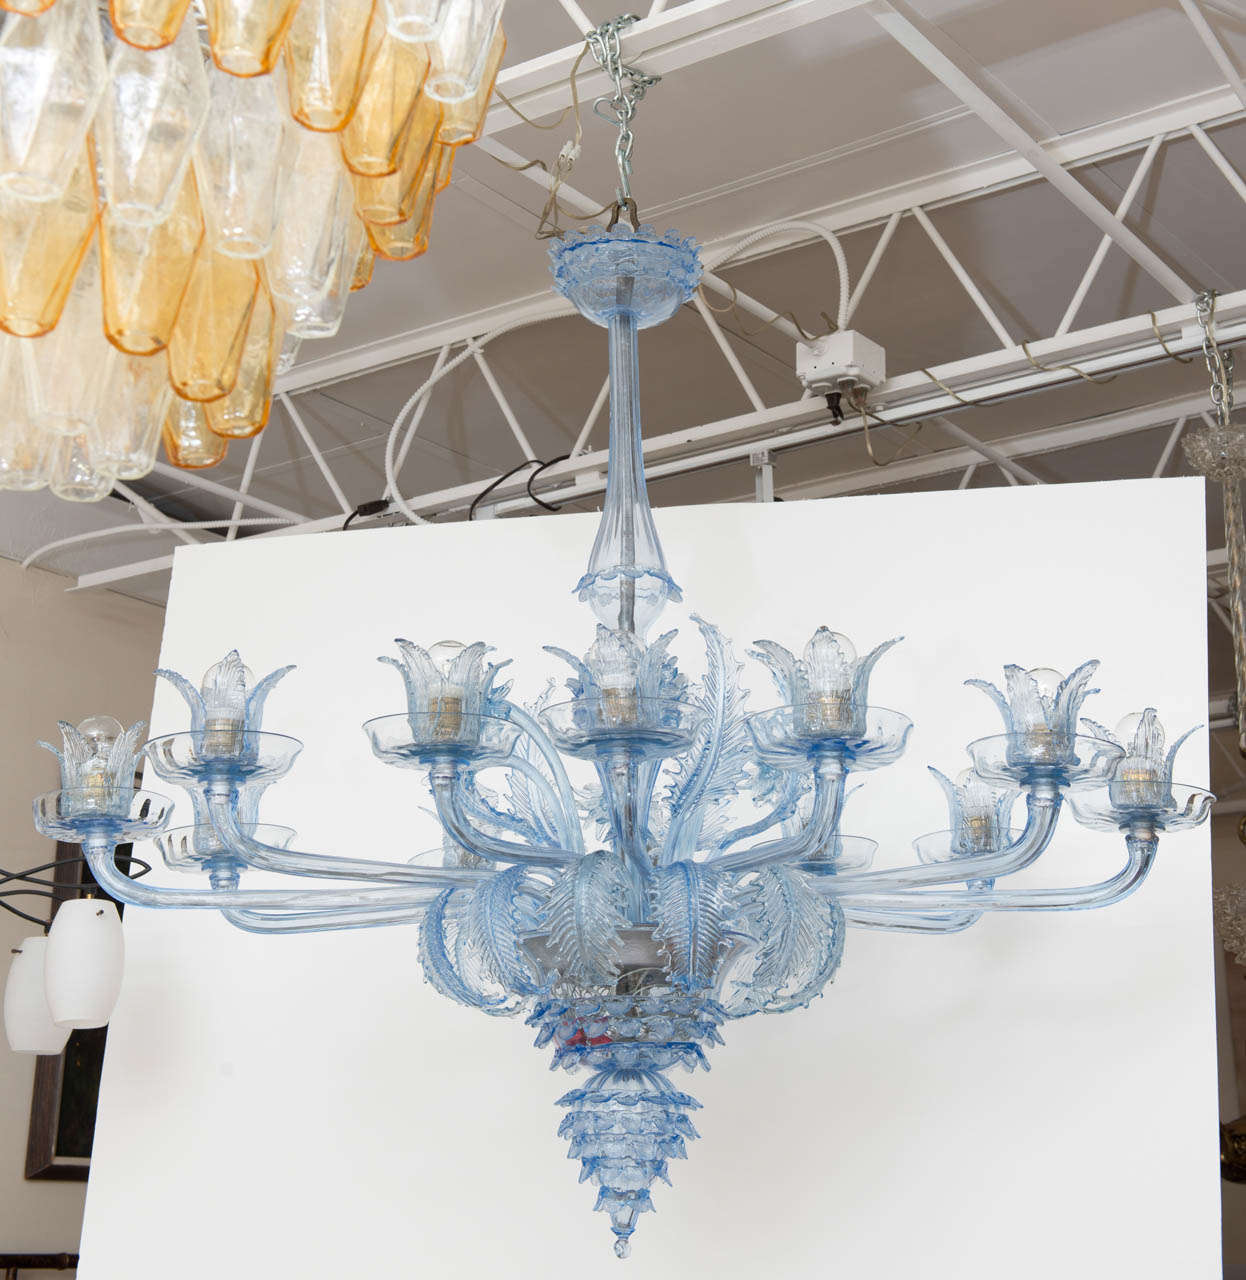 Stunning chandelier by Barovier e Toso in the clearest blue glass imaginable, a true masterpiece.